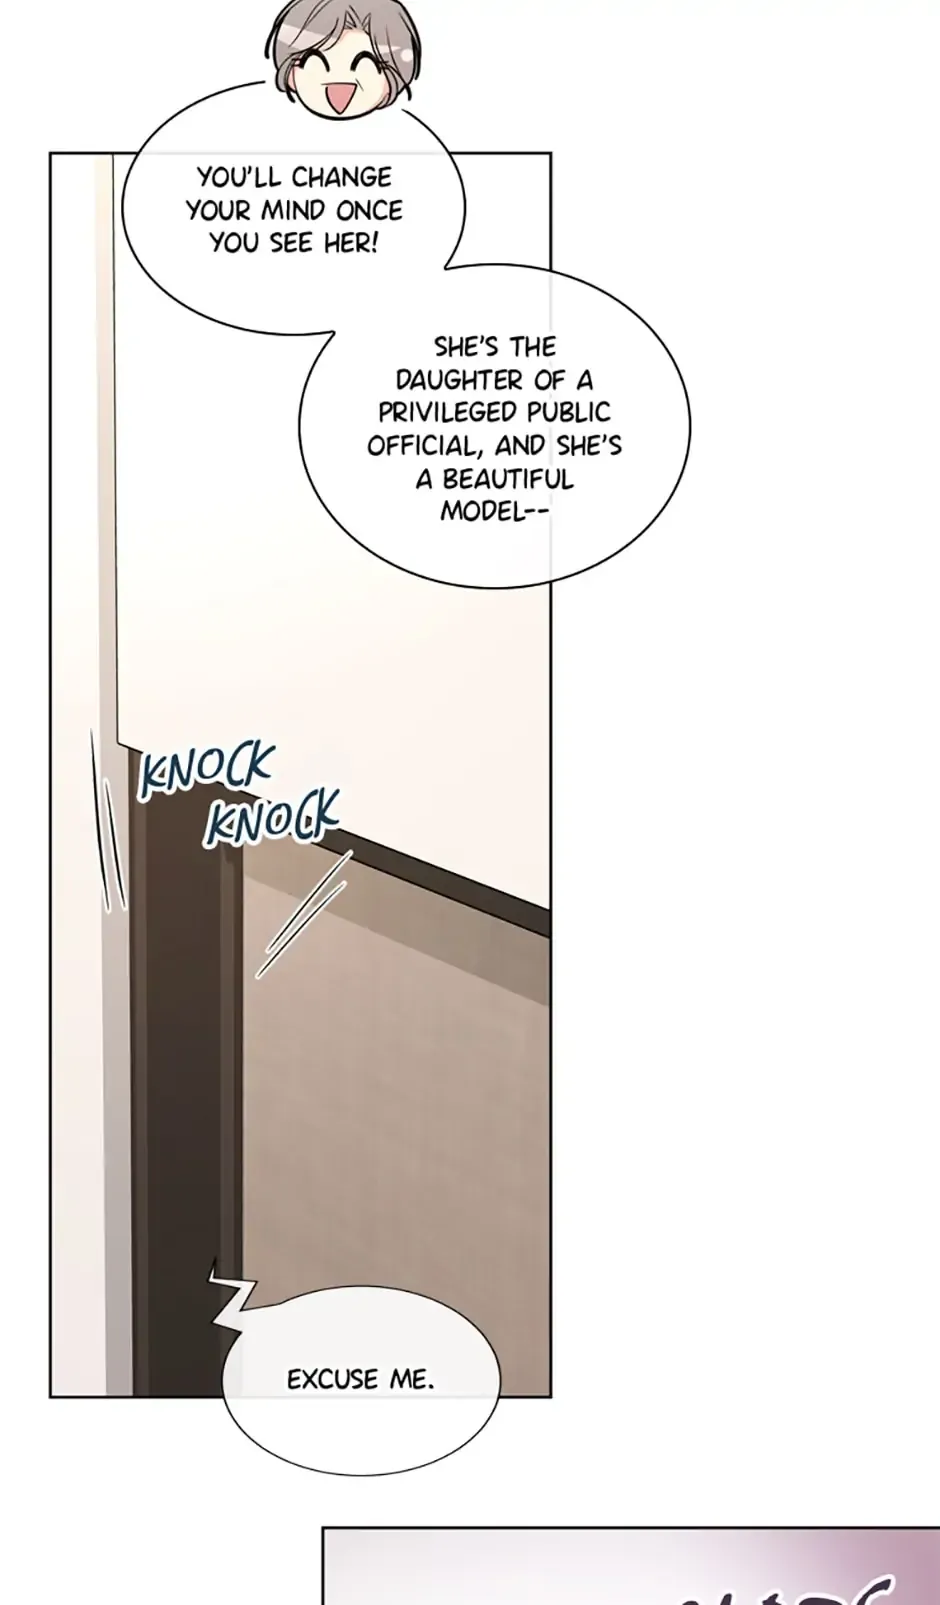 In-house stalking is prohibited chapter 46